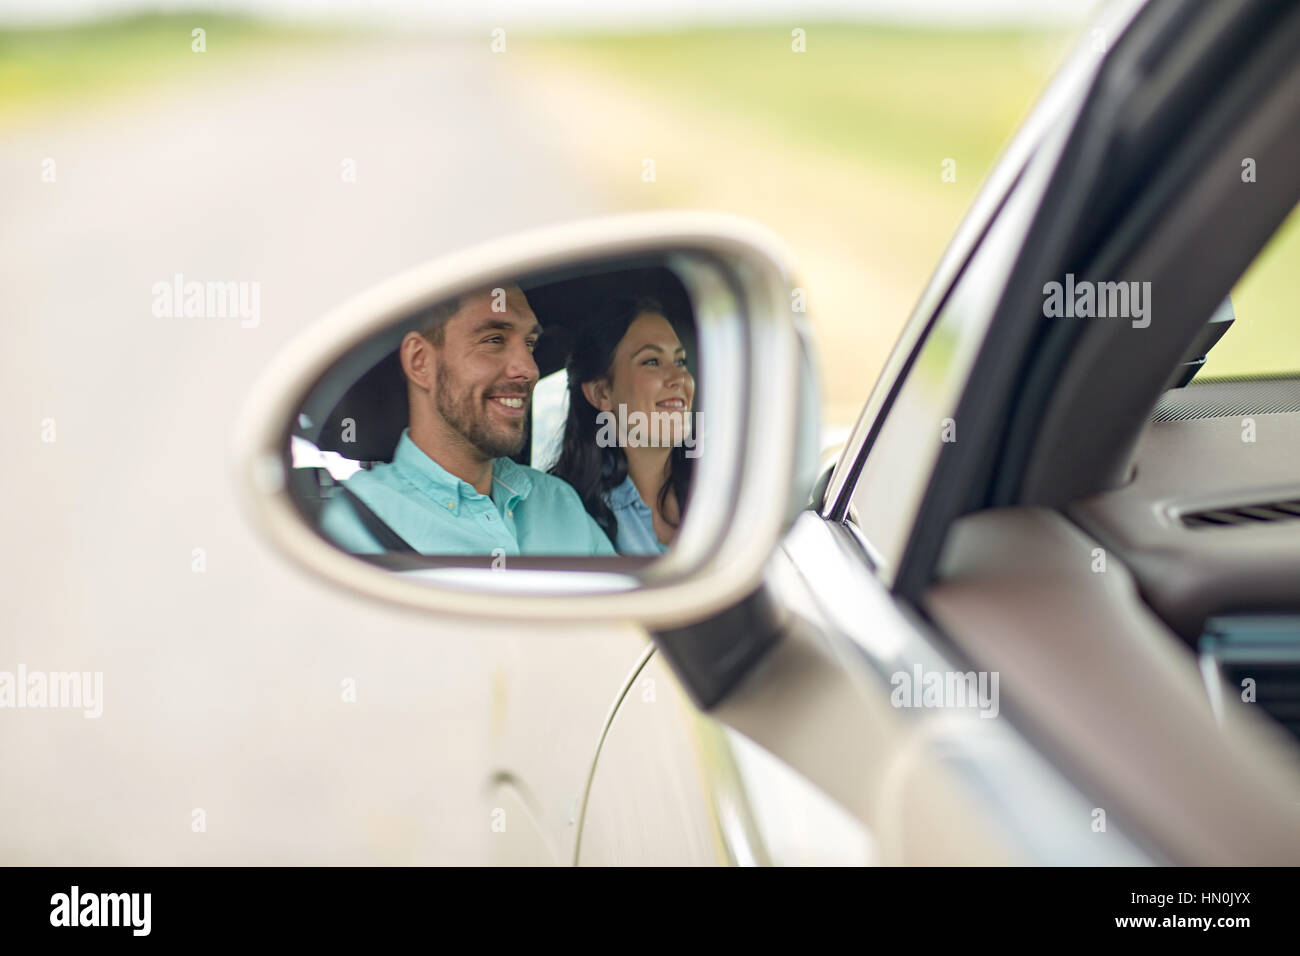 side mirror reflection of happy couple driving car Stock Photo